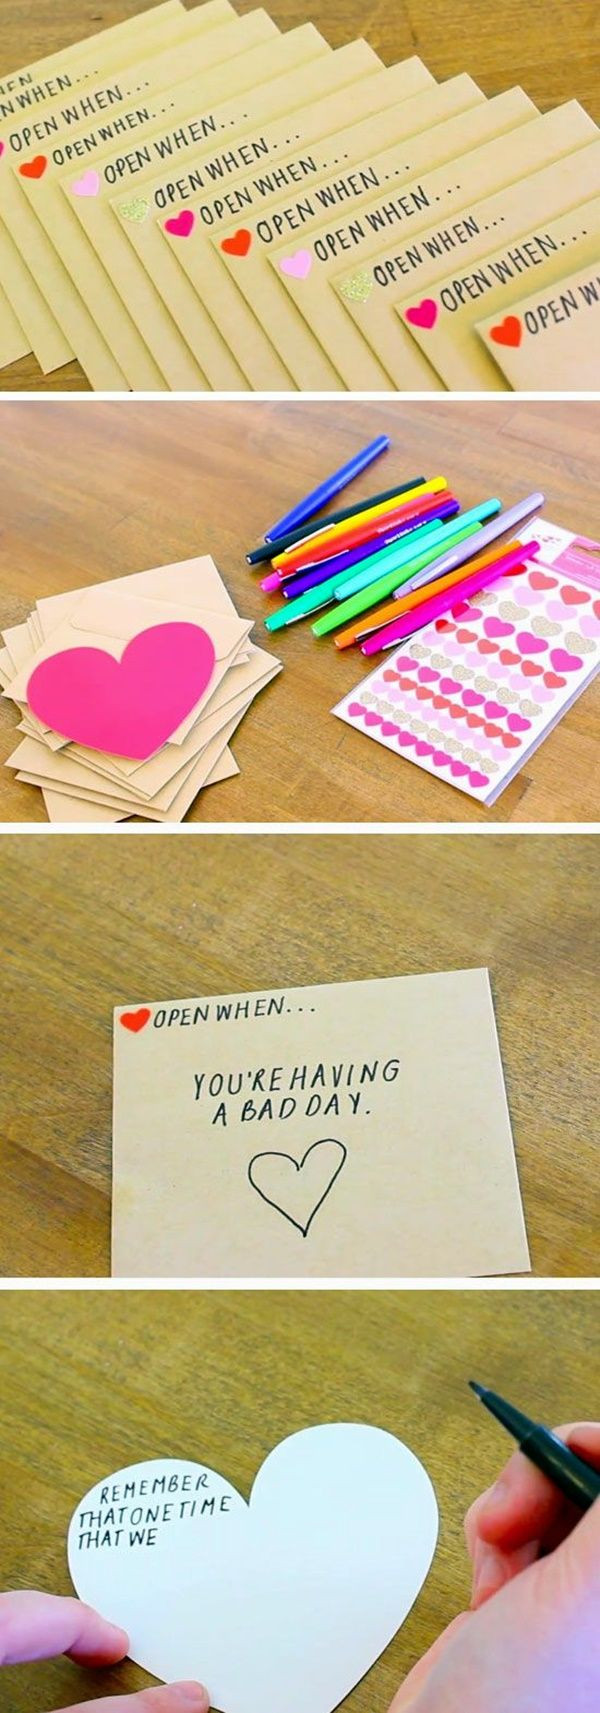 Cute Ideas For Valentines Day For Him
 101 Homemade Valentines Day Ideas for Him that re really